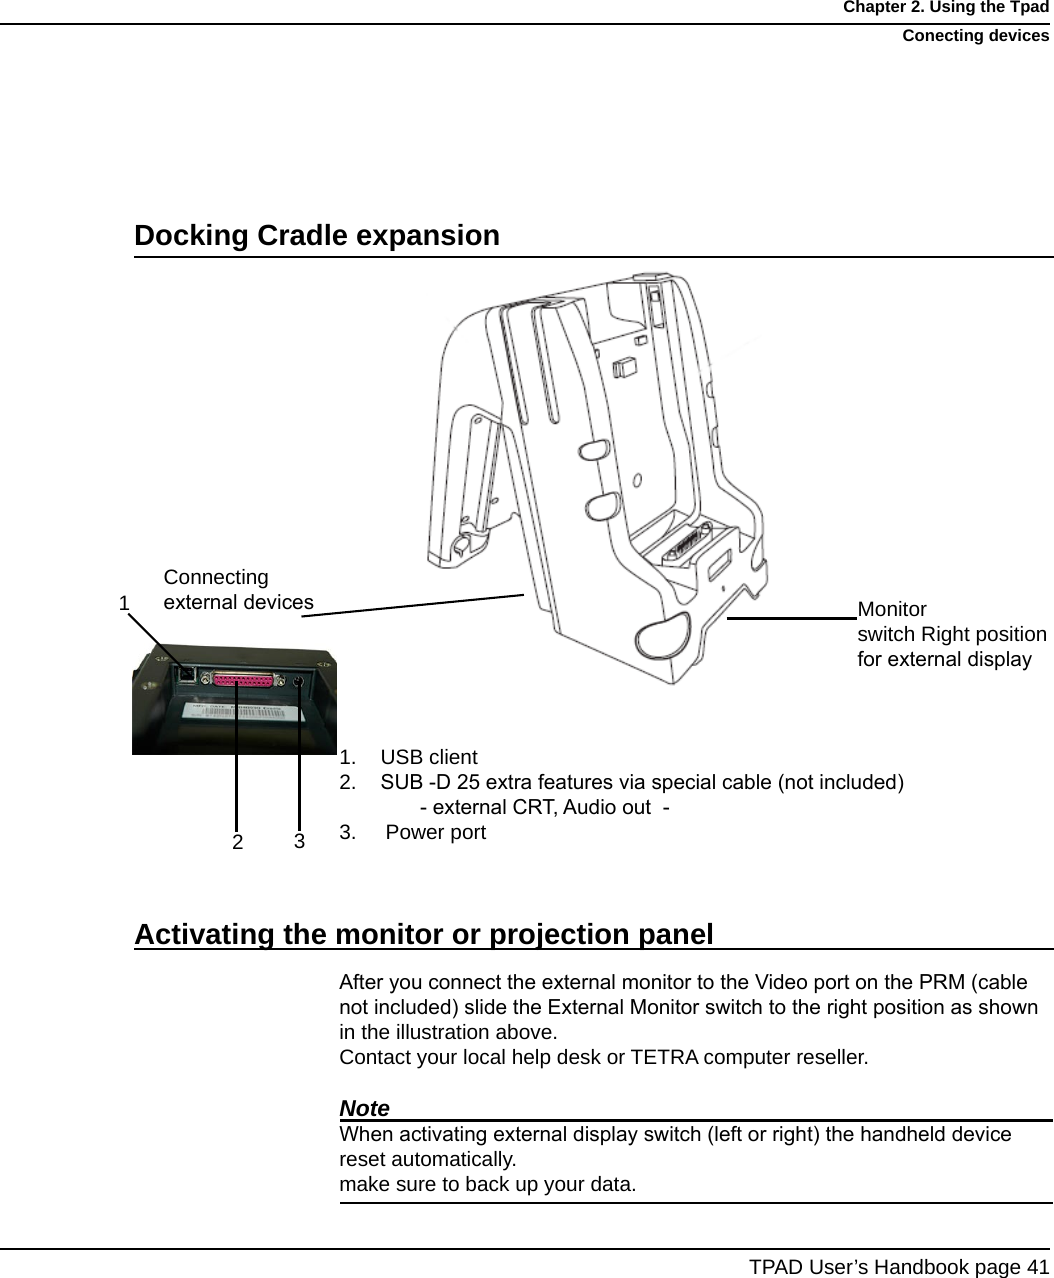 USB clientSUB -D 25 extra features via special cable (not included)           - external CRT, Audio out  -3.     Power portAfter you connect the external monitor to the Video port on the PRM (cable not included) slide the External Monitor switch to the right position as shown in the illustration above. Contact your local help desk or TETRA computer reseller.NoteWhen activating external display switch (left or right) the handheld device  reset automatically.make sure to back up your data.1.2.TPAD User’s Handbook page 41Chapter 2. Using the TpadConecting devicesDocking Cradle expansionMonitor switch Right position  for external displayConnecting external devicesActivating the monitor or projection panel13 2